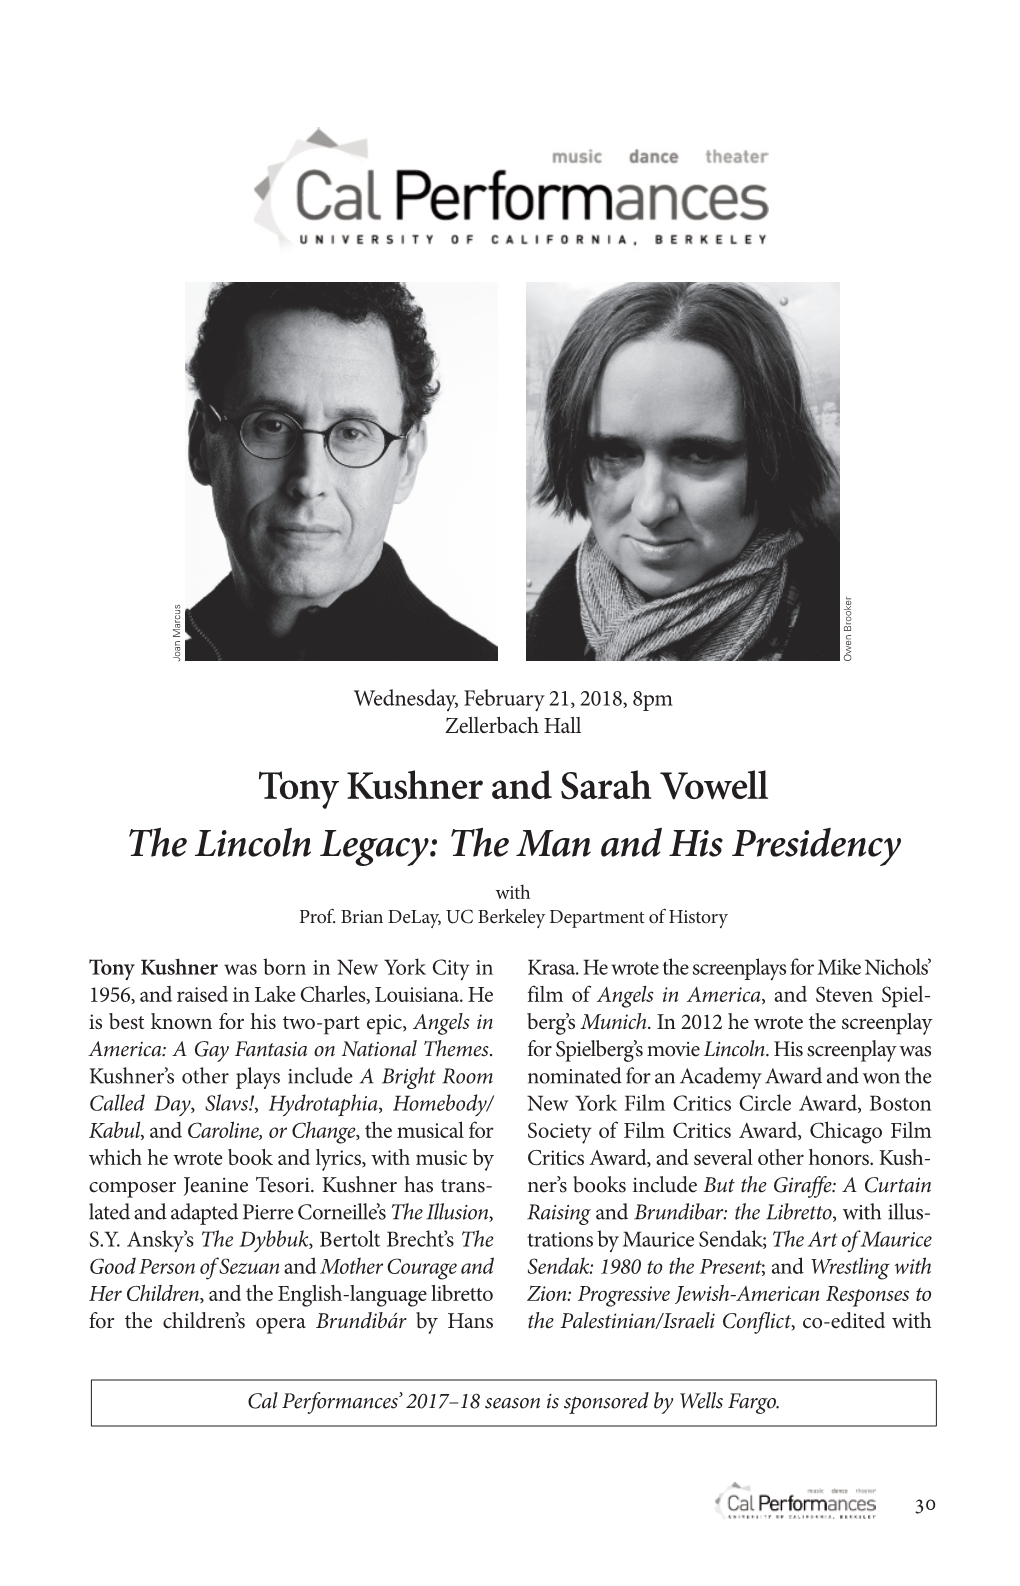 Tony Kushner and Sarah Vowell the Lincoln Legacy: the Man and His Presidency with Prof